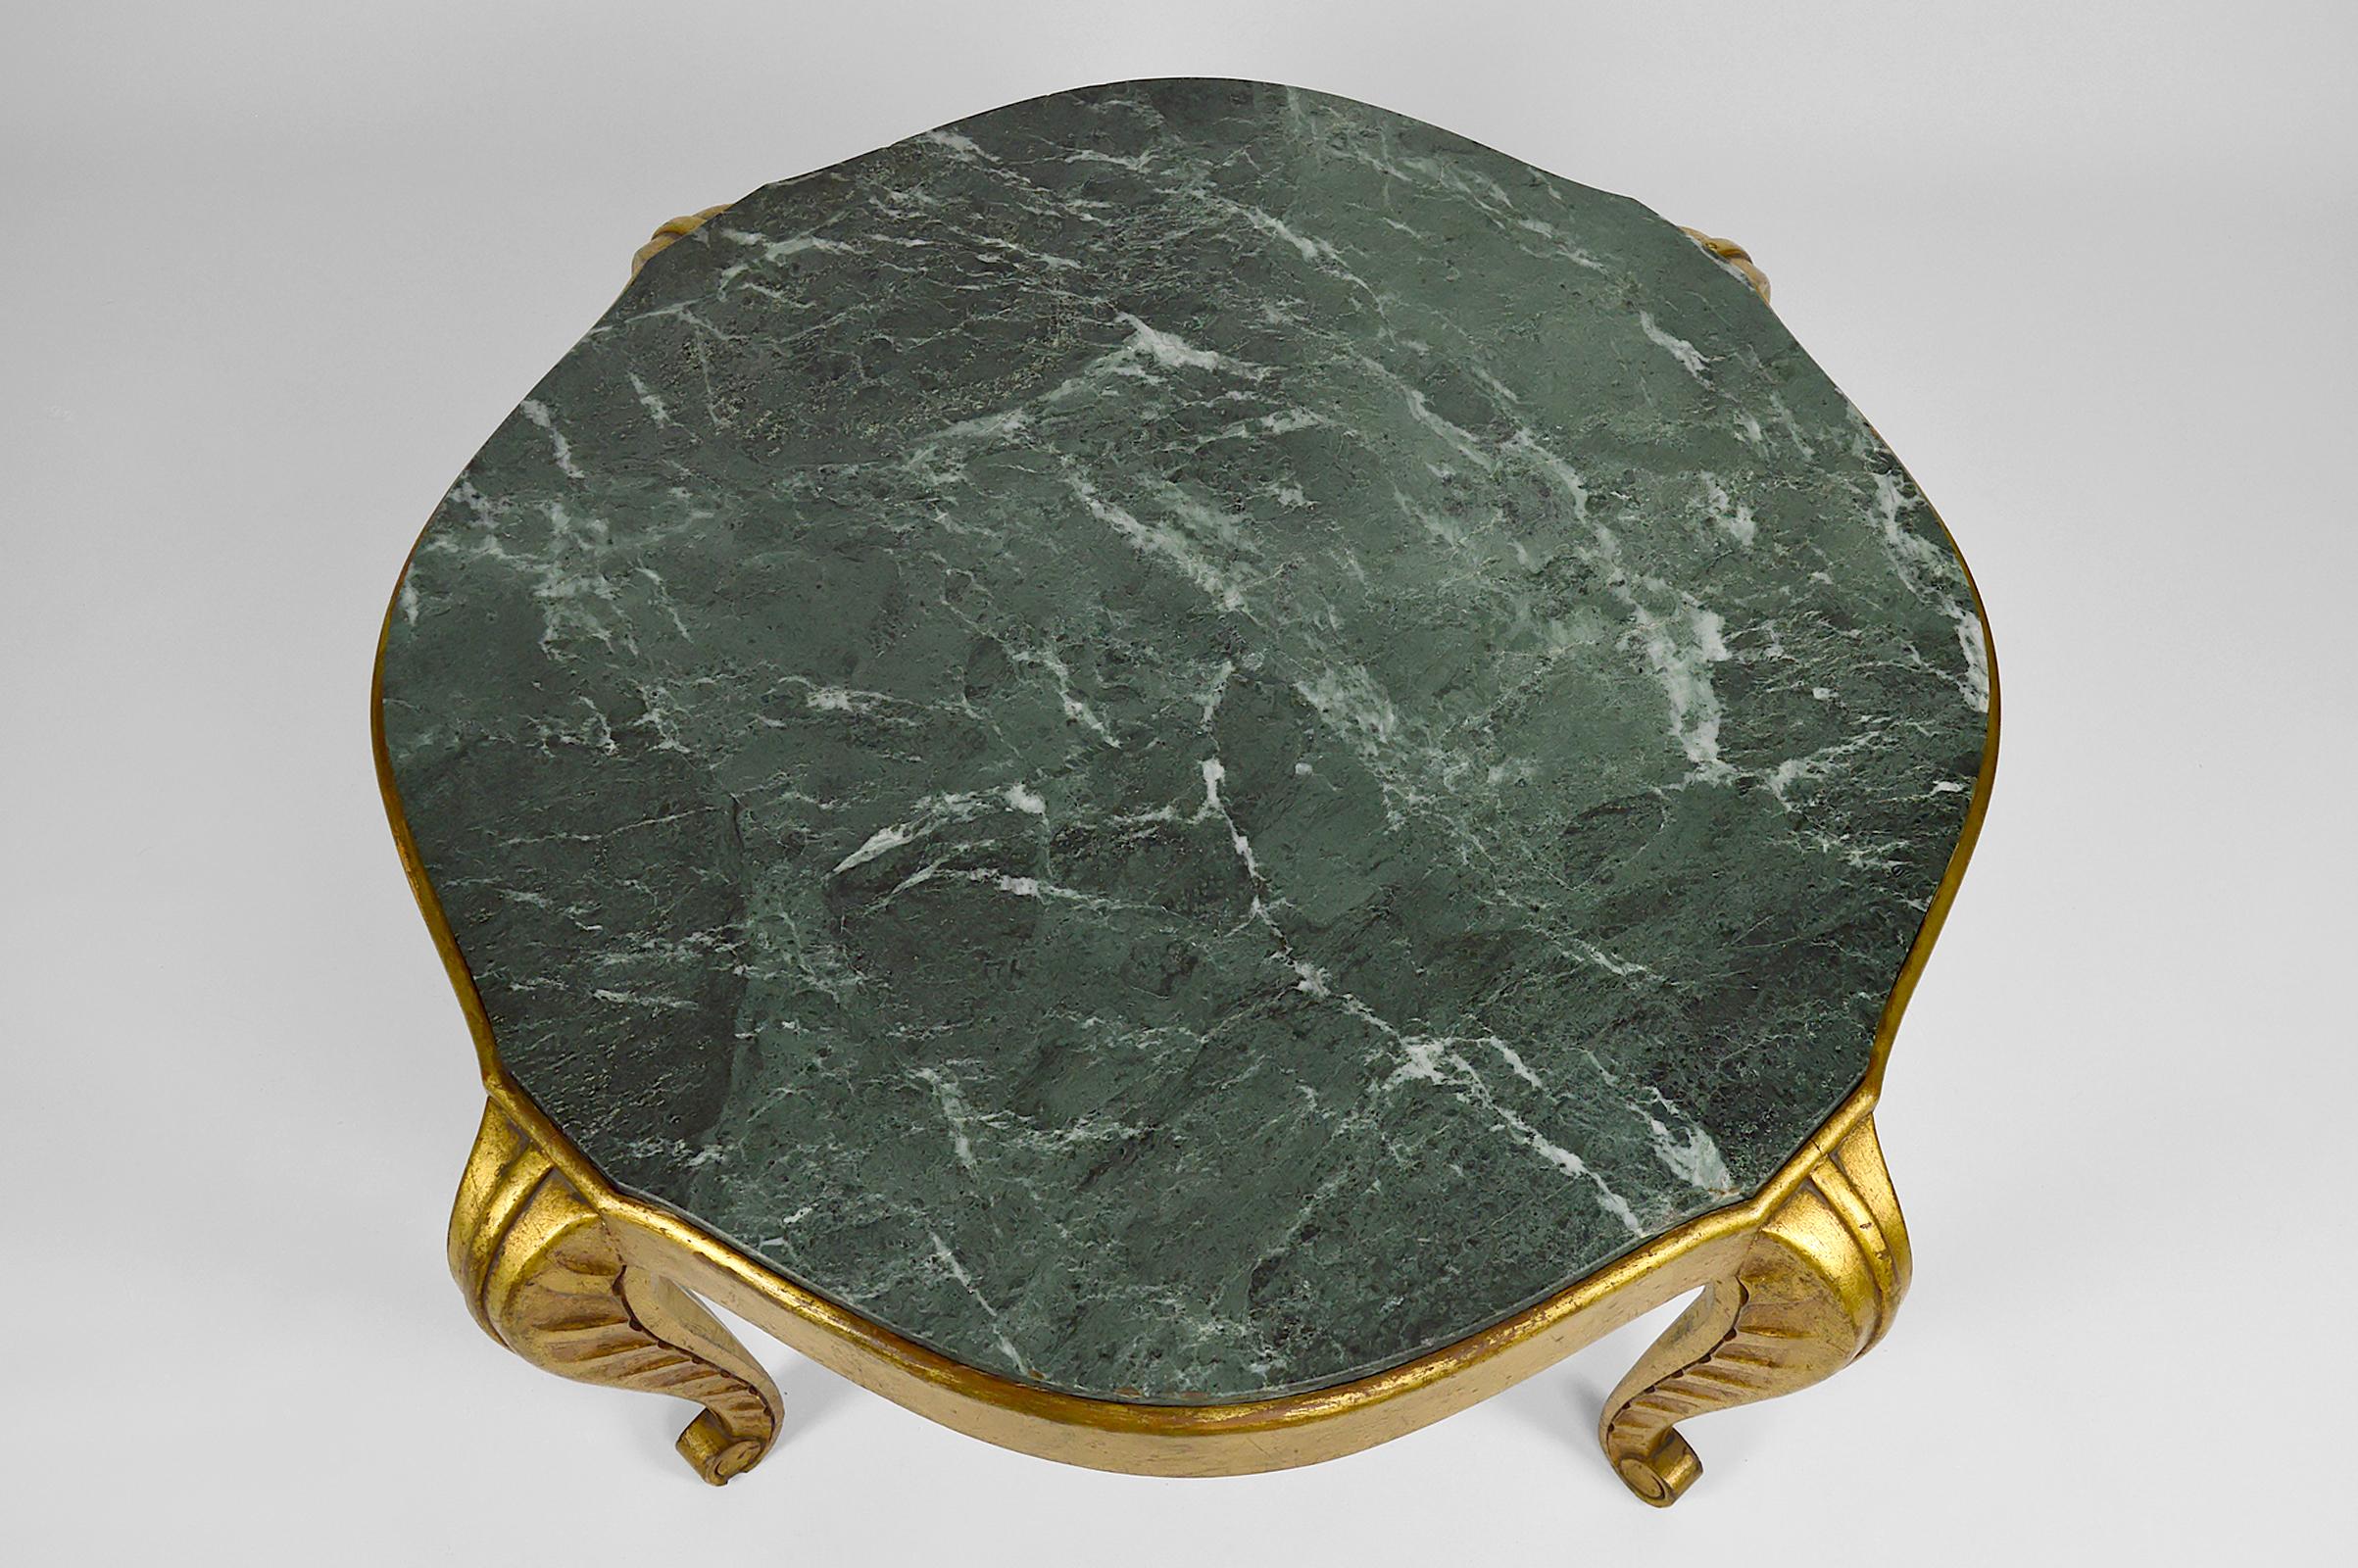 Gilded Side Table with Marble Top by Maison Jansen, Neoclassical Art Deco, 1940s For Sale 6